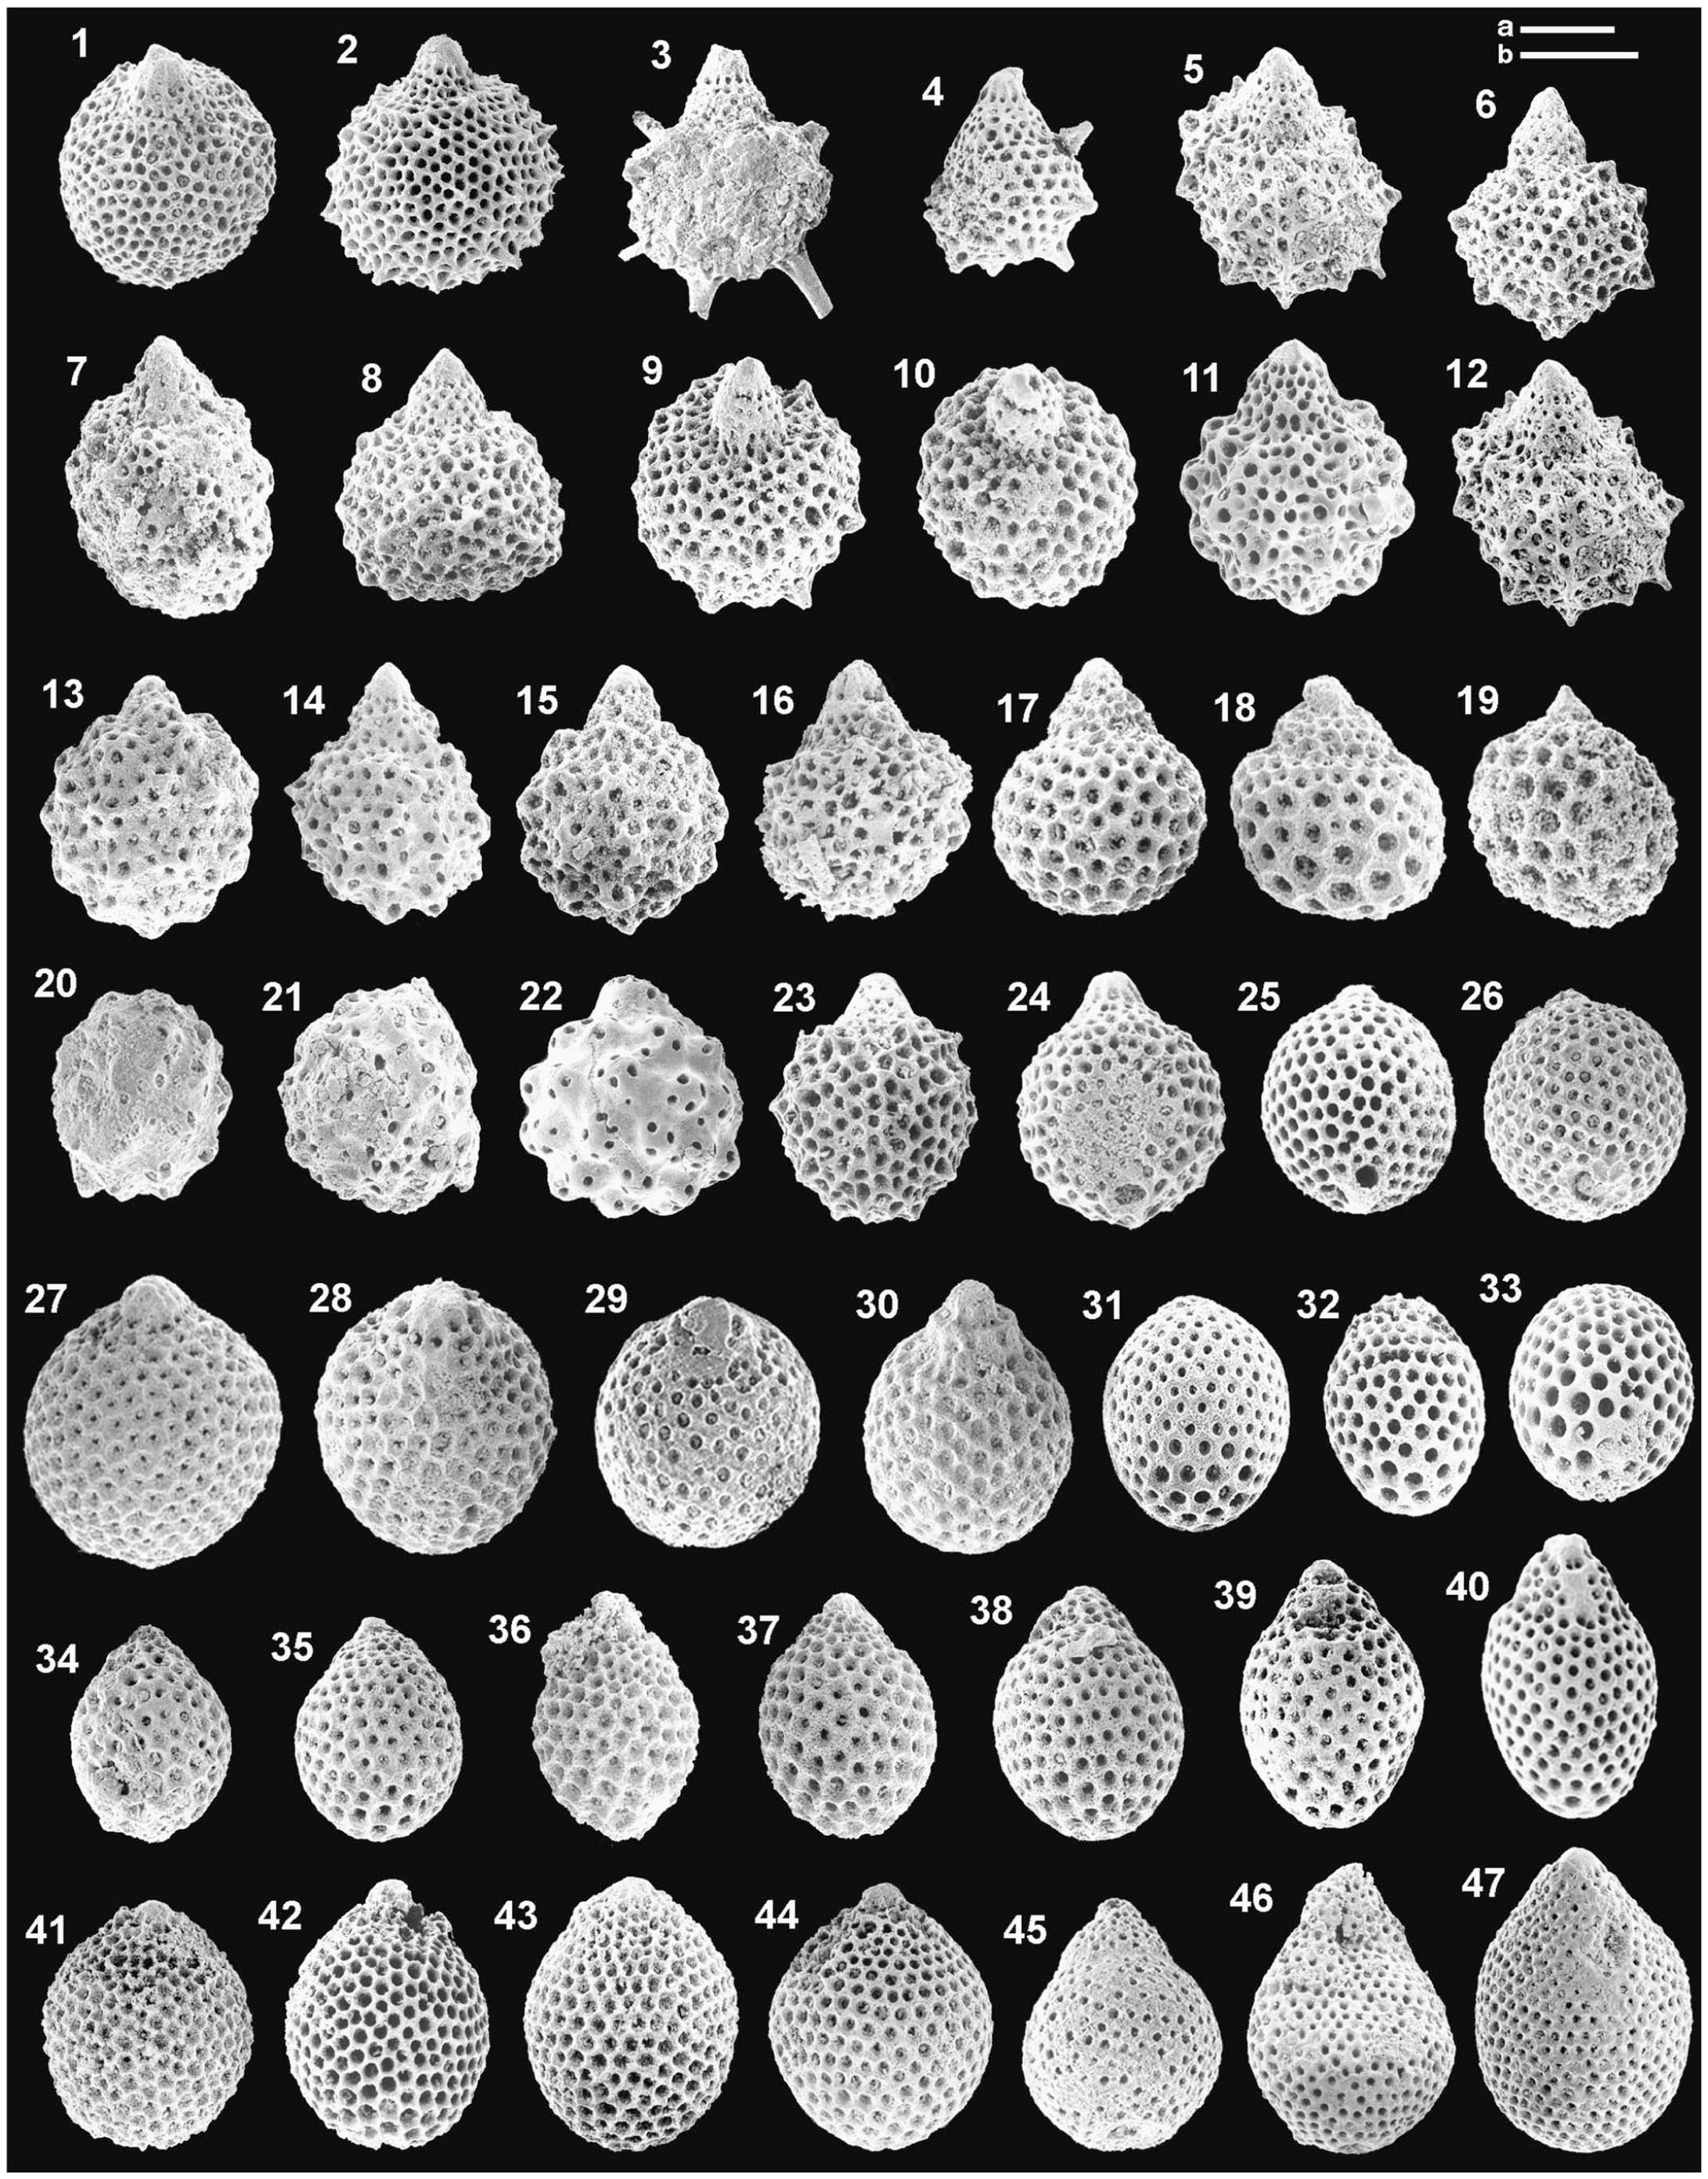 Middle And Late Jurassic Radiolarians From The Neotethys Suture In The Eastern Alps